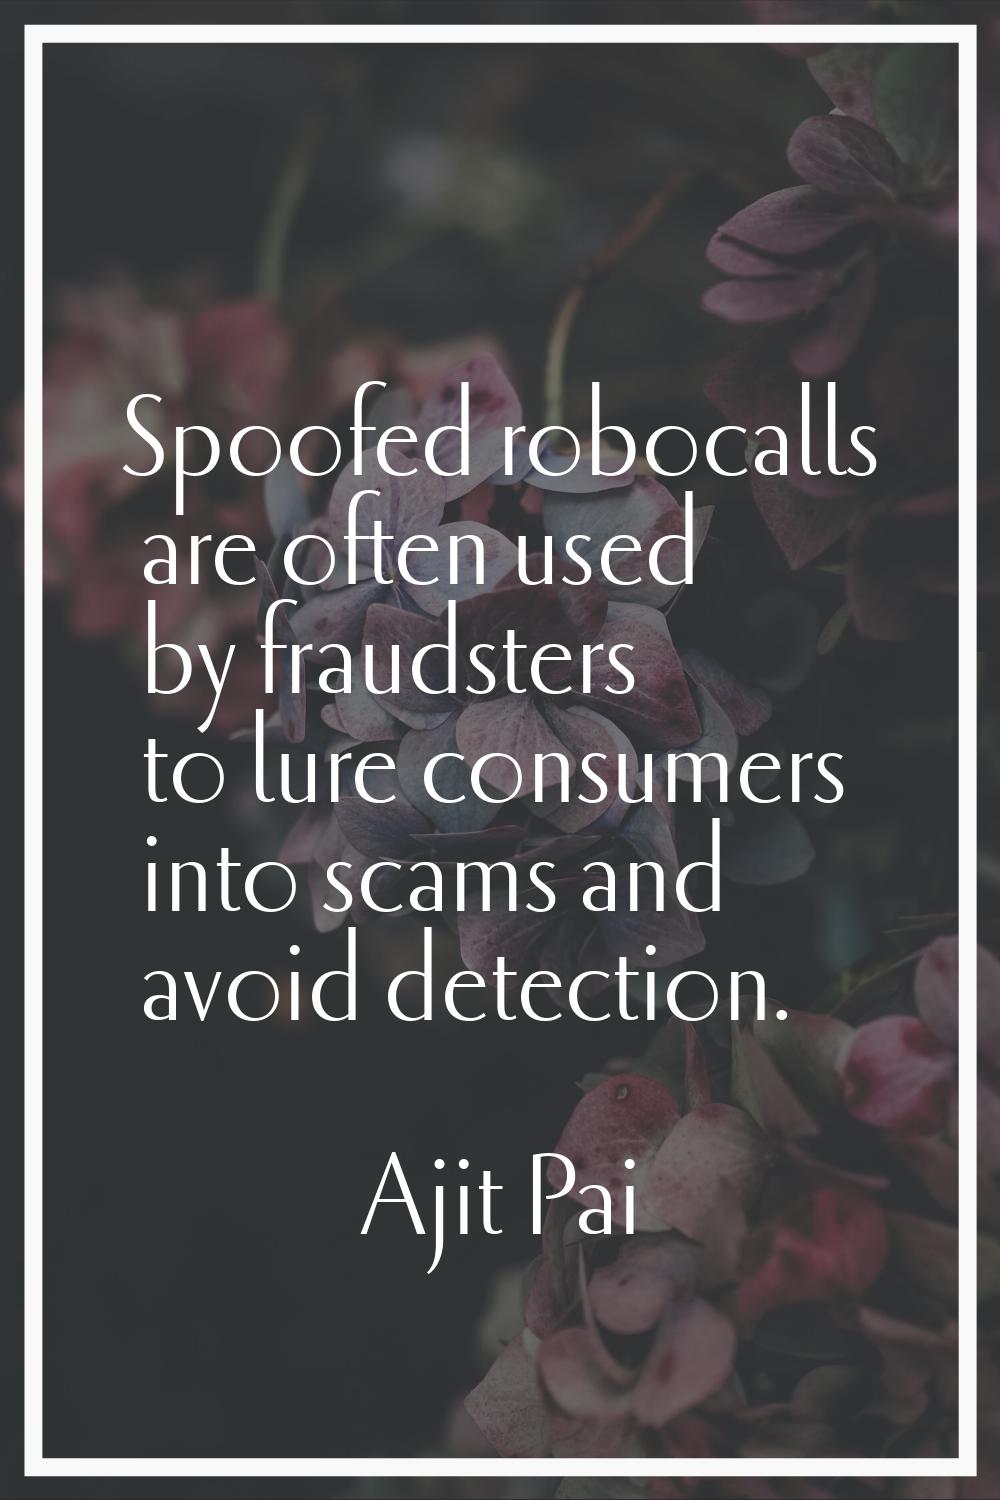 Spoofed robocalls are often used by fraudsters to lure consumers into scams and avoid detection.